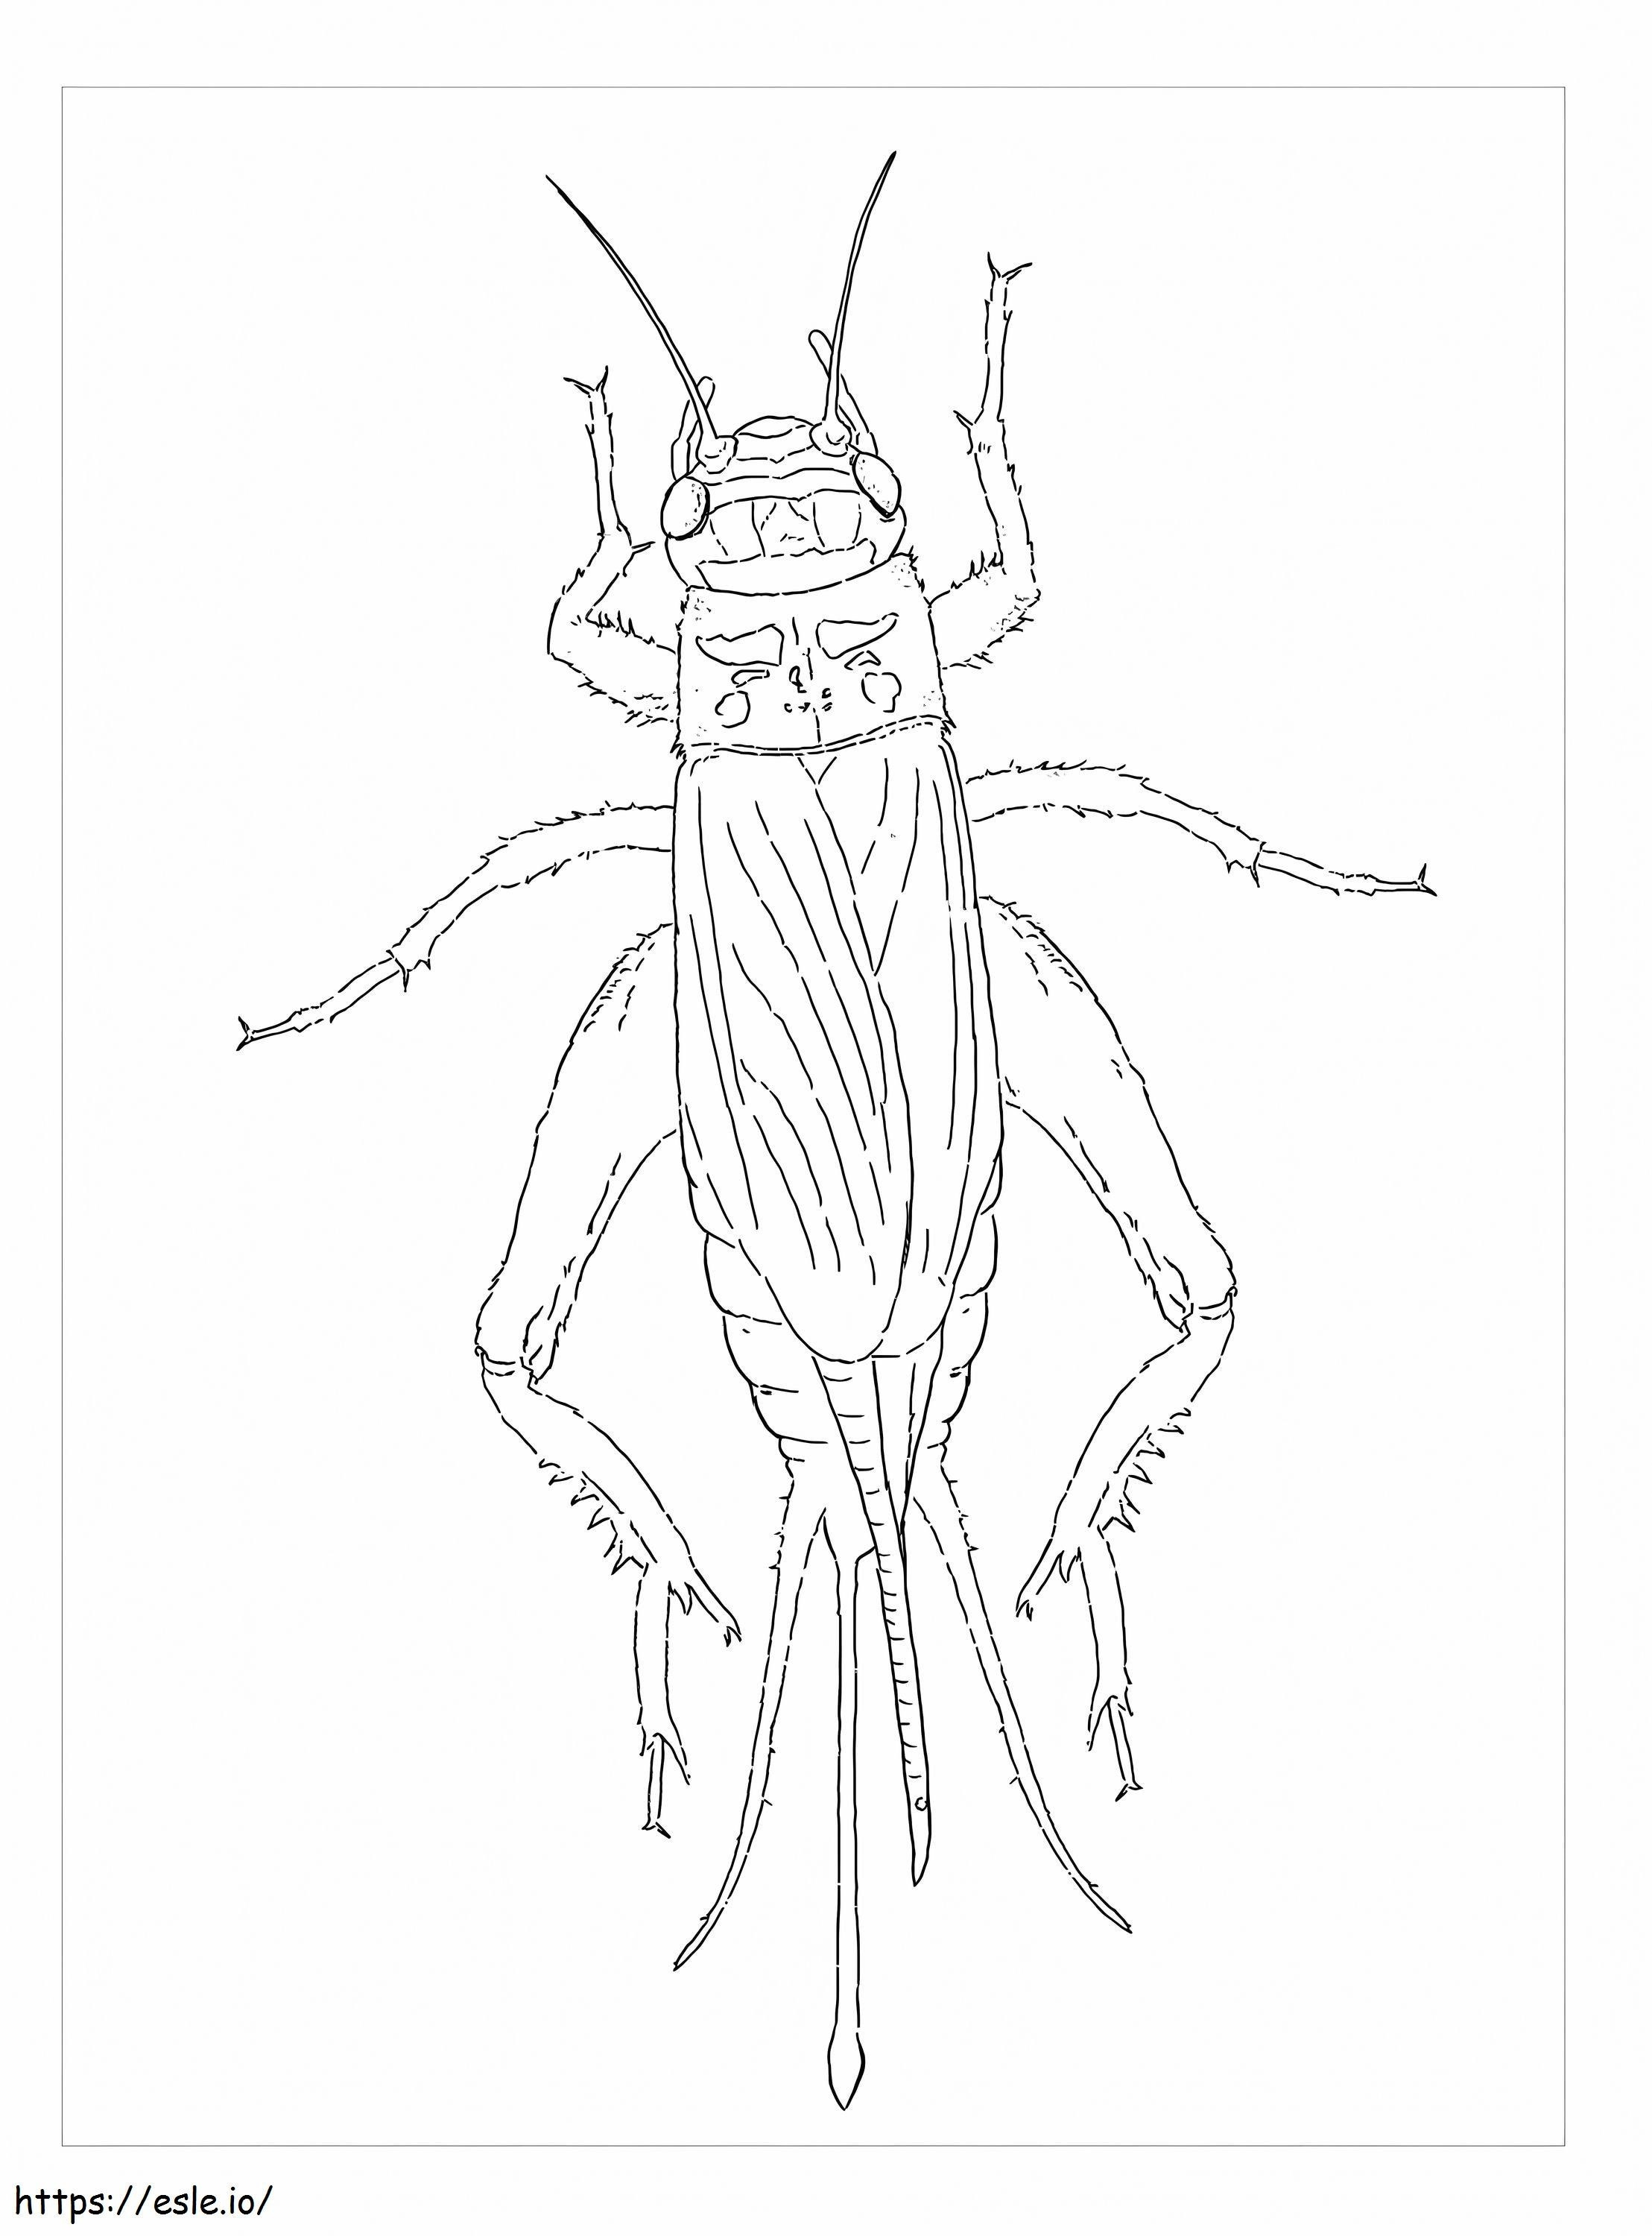 House Cricket coloring page